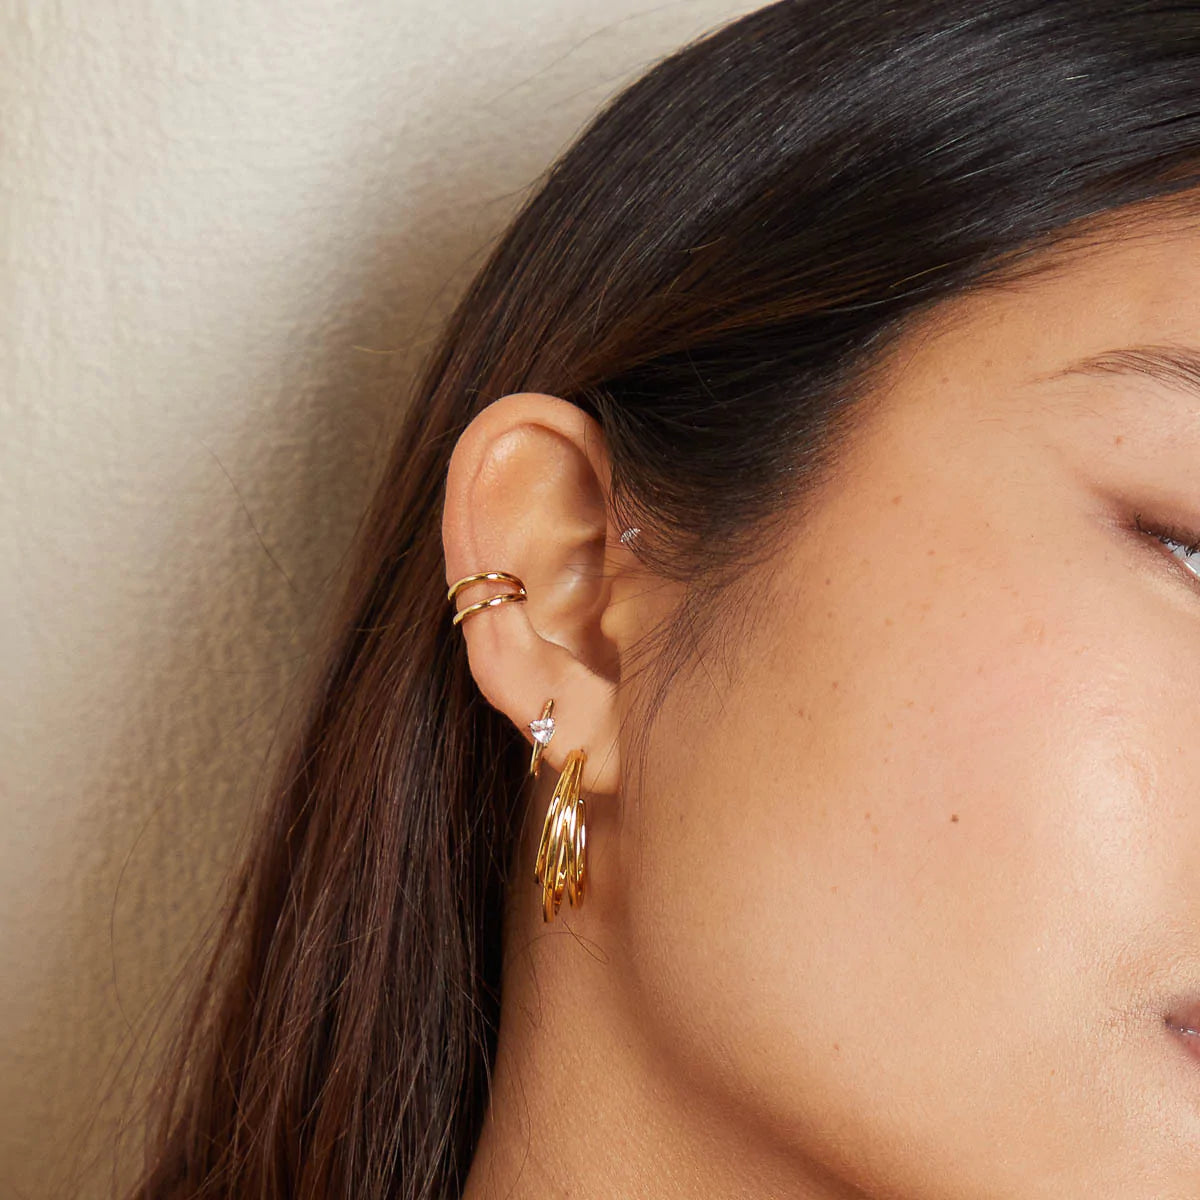 Illusion Essential Ear Cuff in Gold worn with other earrings